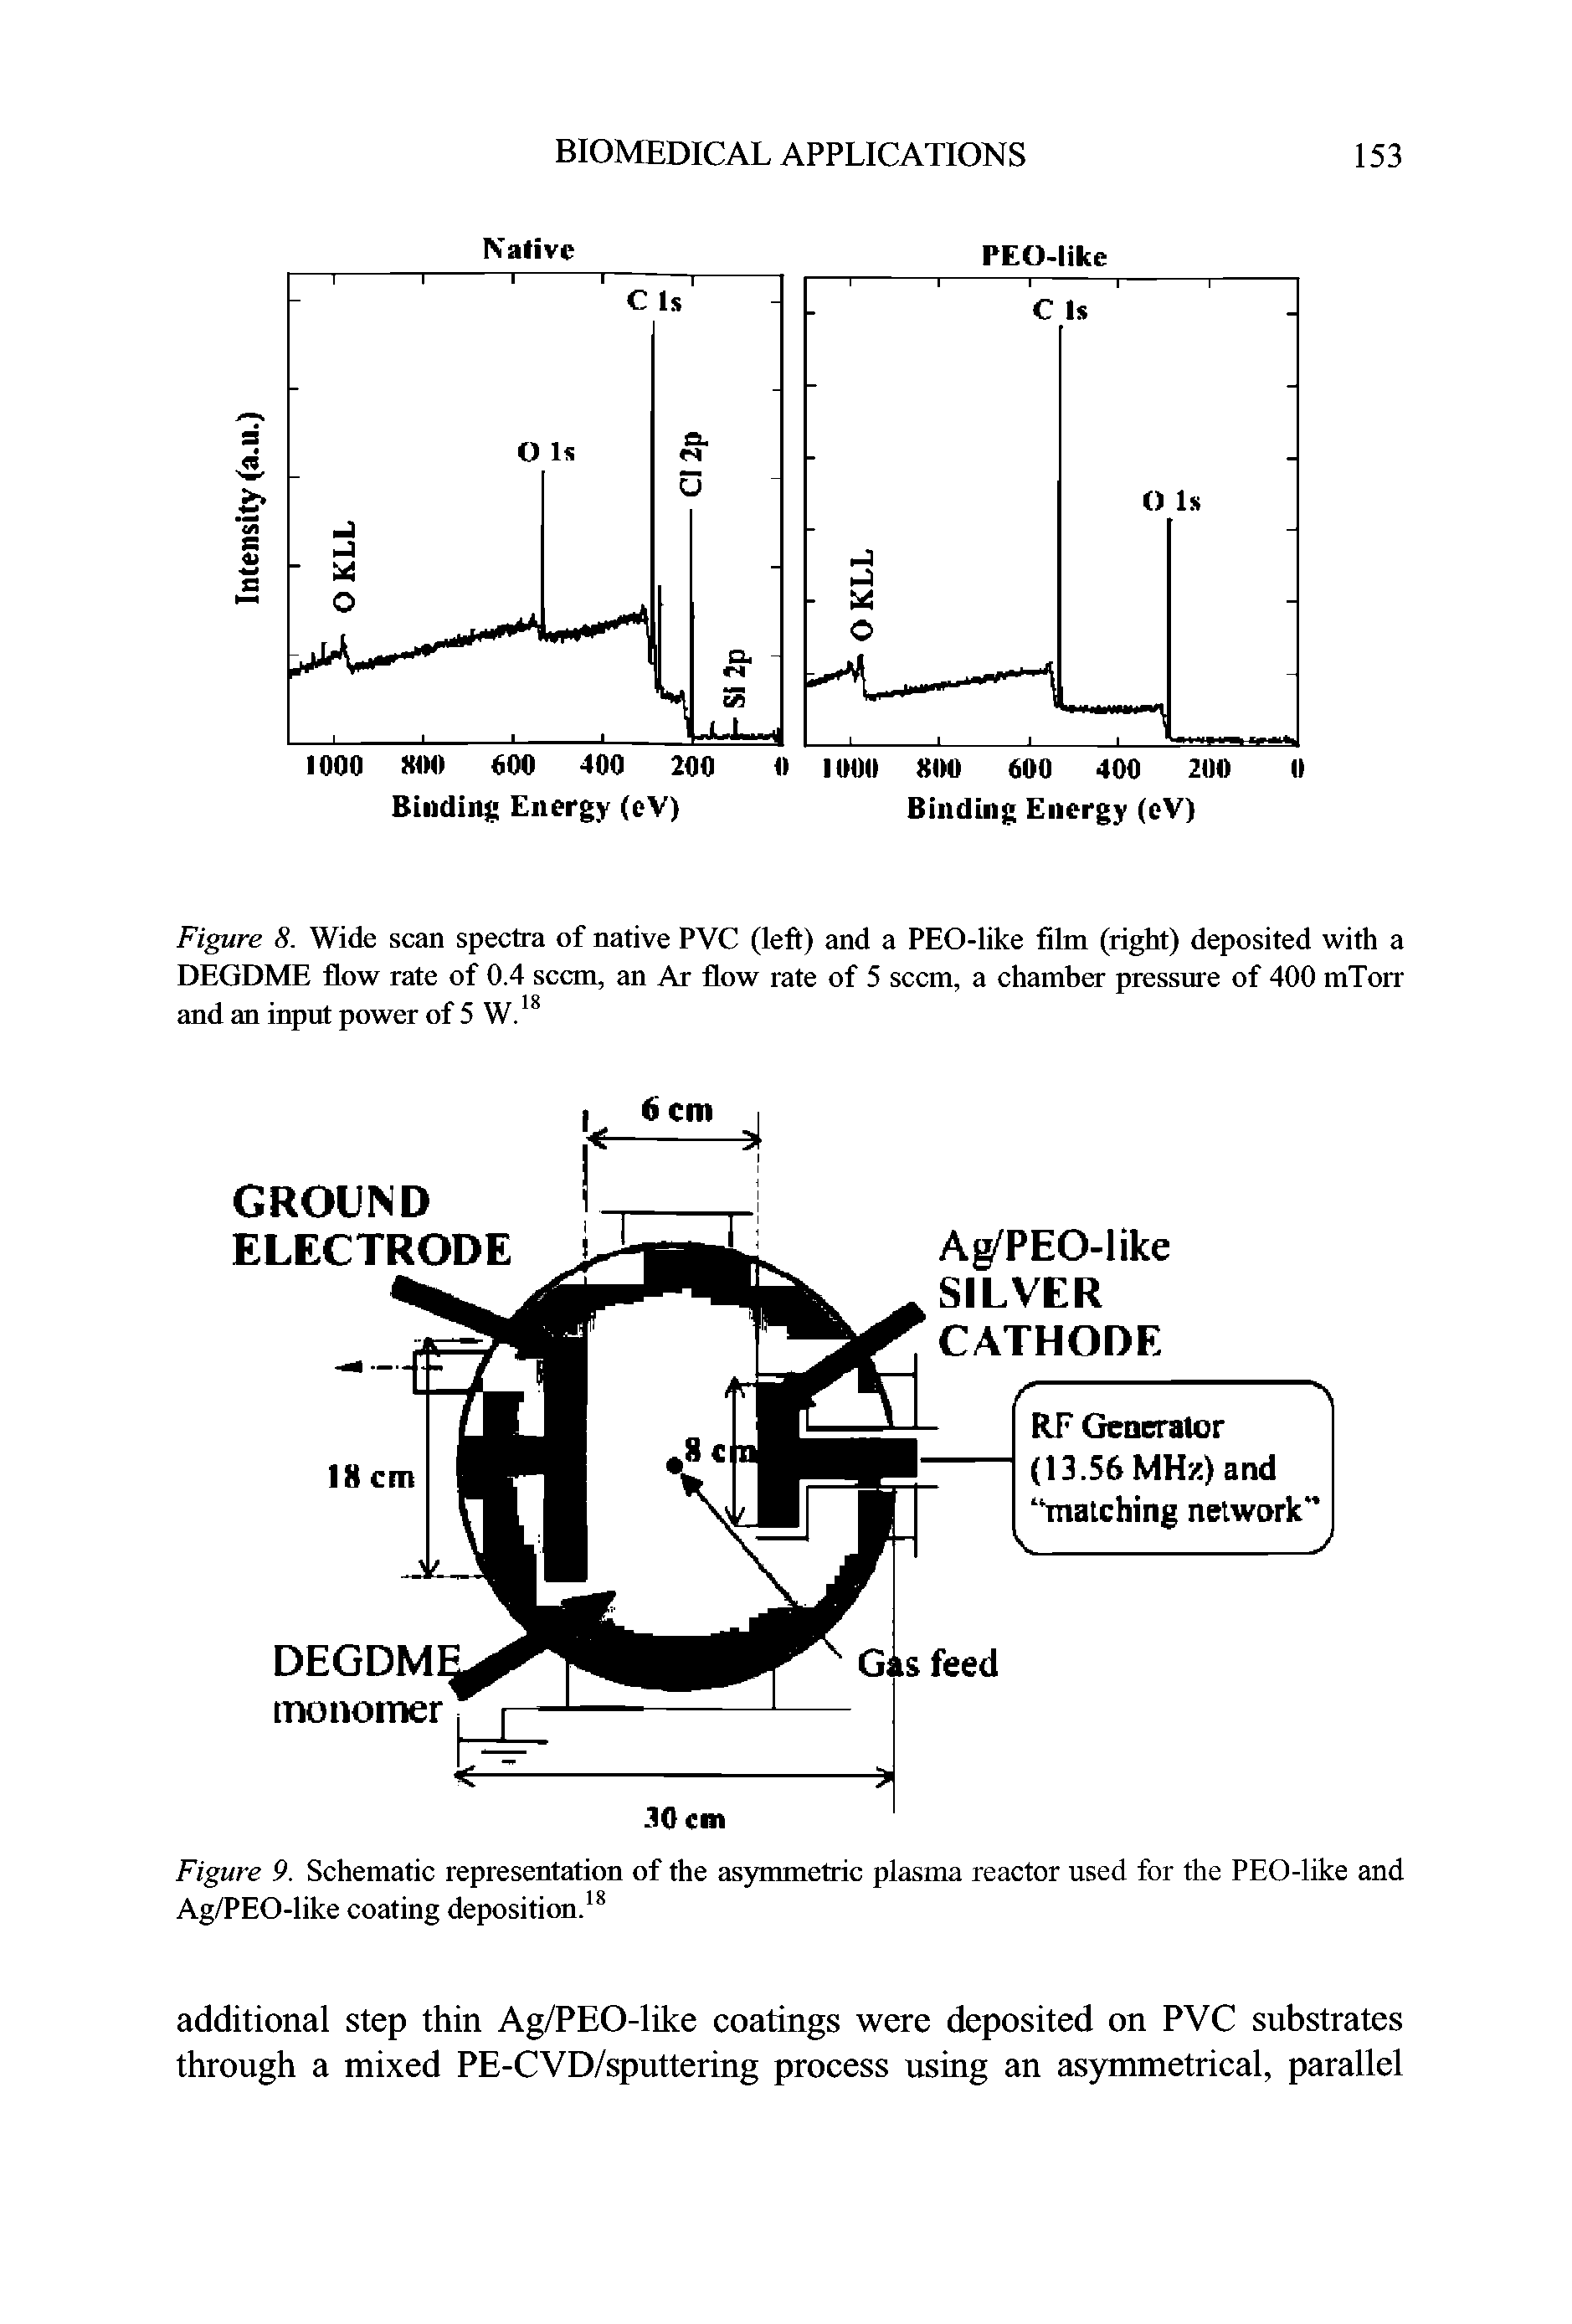 Figure 8. Wide scan spectra of native PVC (left) and a PEO-like film (right) deposited with a DEGDME flow rate of 0.4 seem, an Ar flow rate of 5 seem, a chamber pressure of 400 mTorr and an input power of 5 W.18...